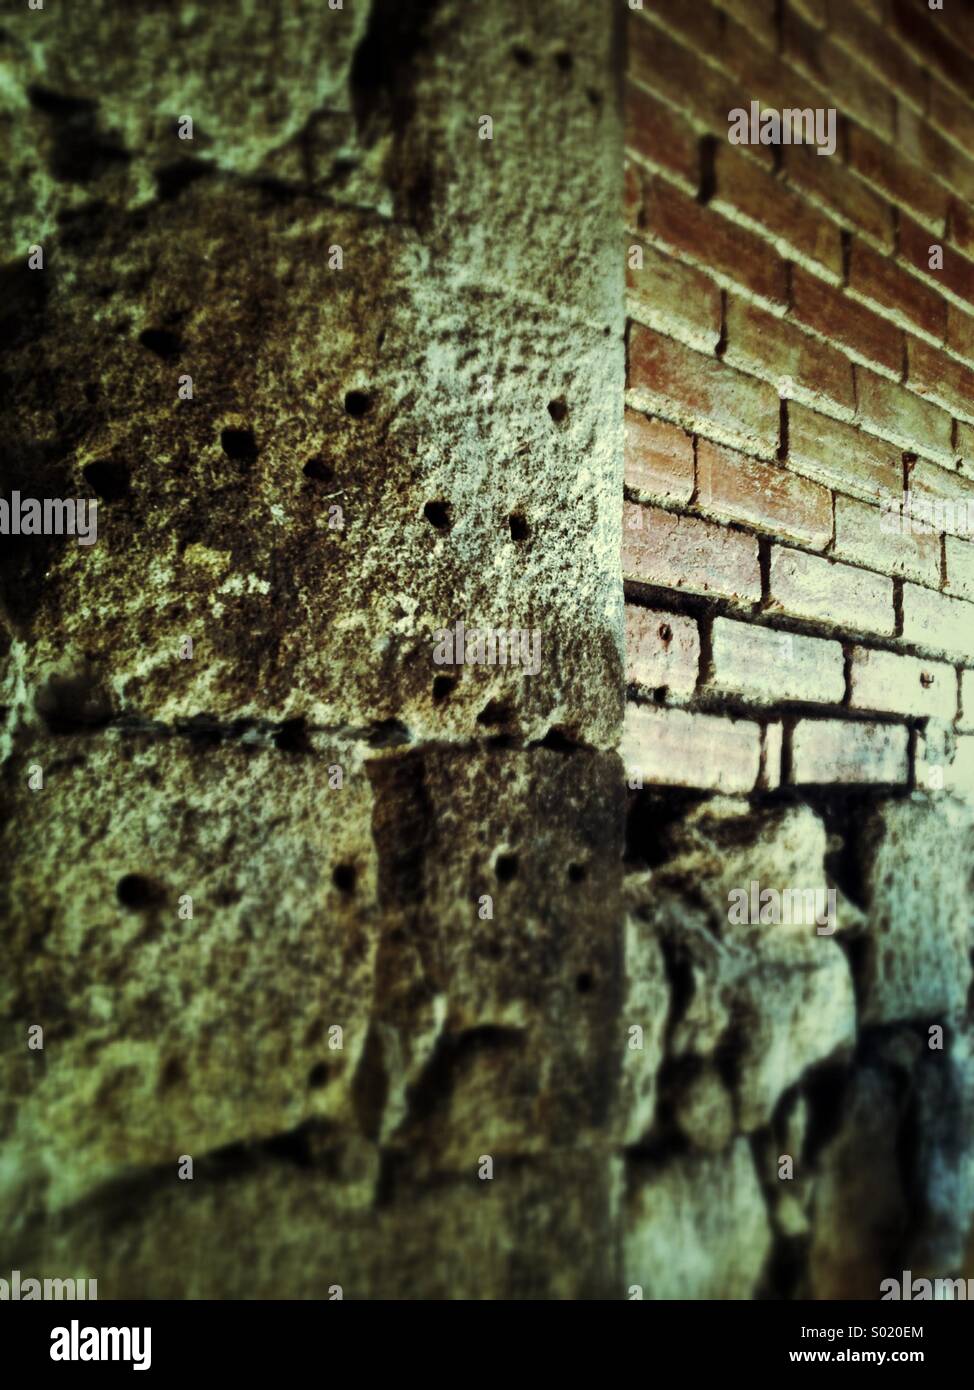 Old stone wall with holes and bricks Stock Photo